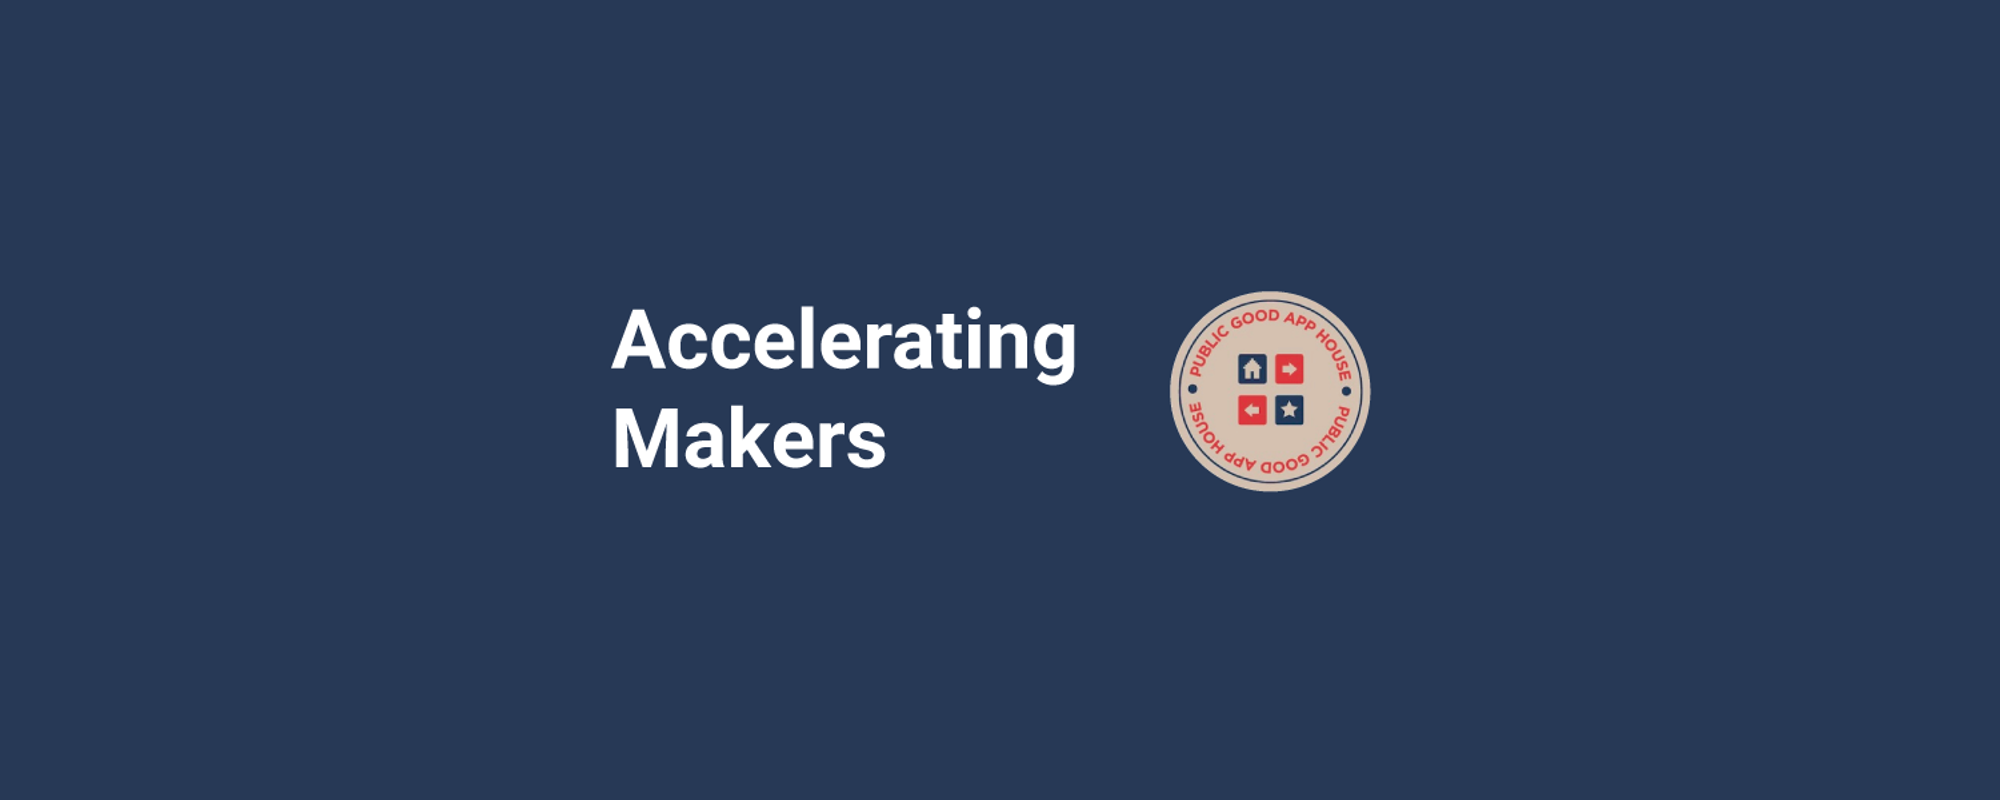 Public Good App House - Accelerating Makers